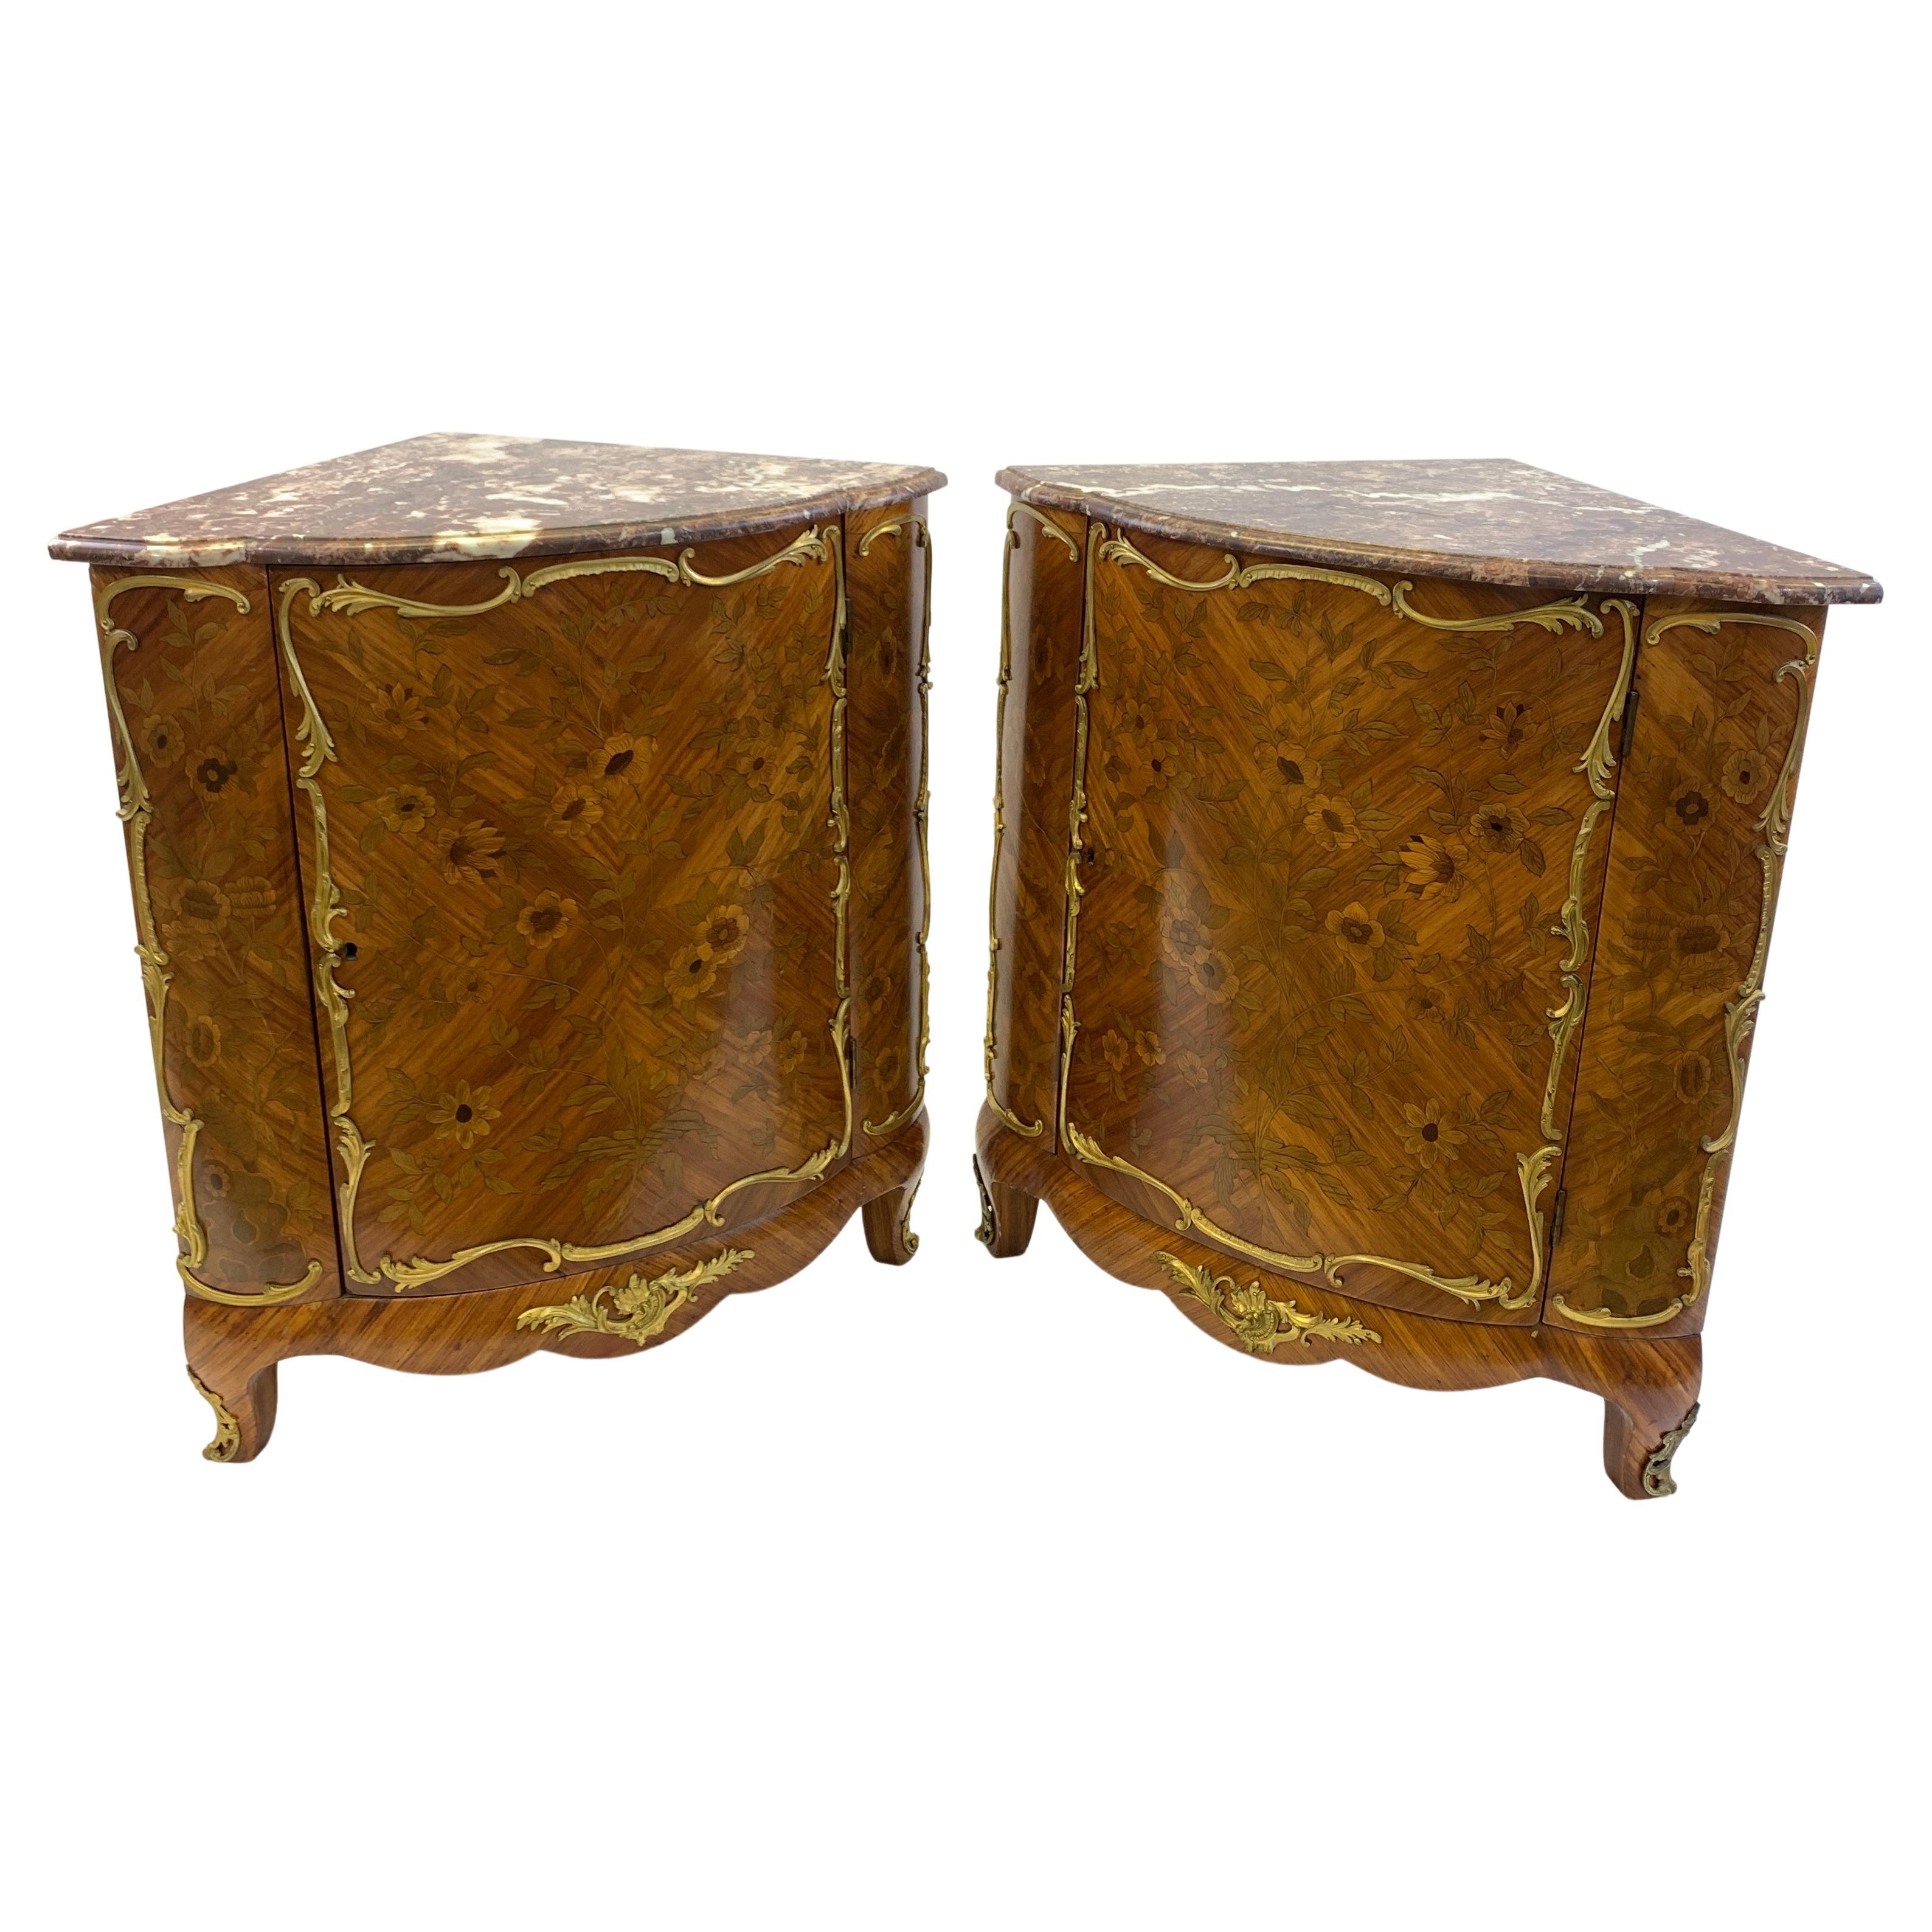 Pair of French Parquetry Corner Cabinets, 19th Century